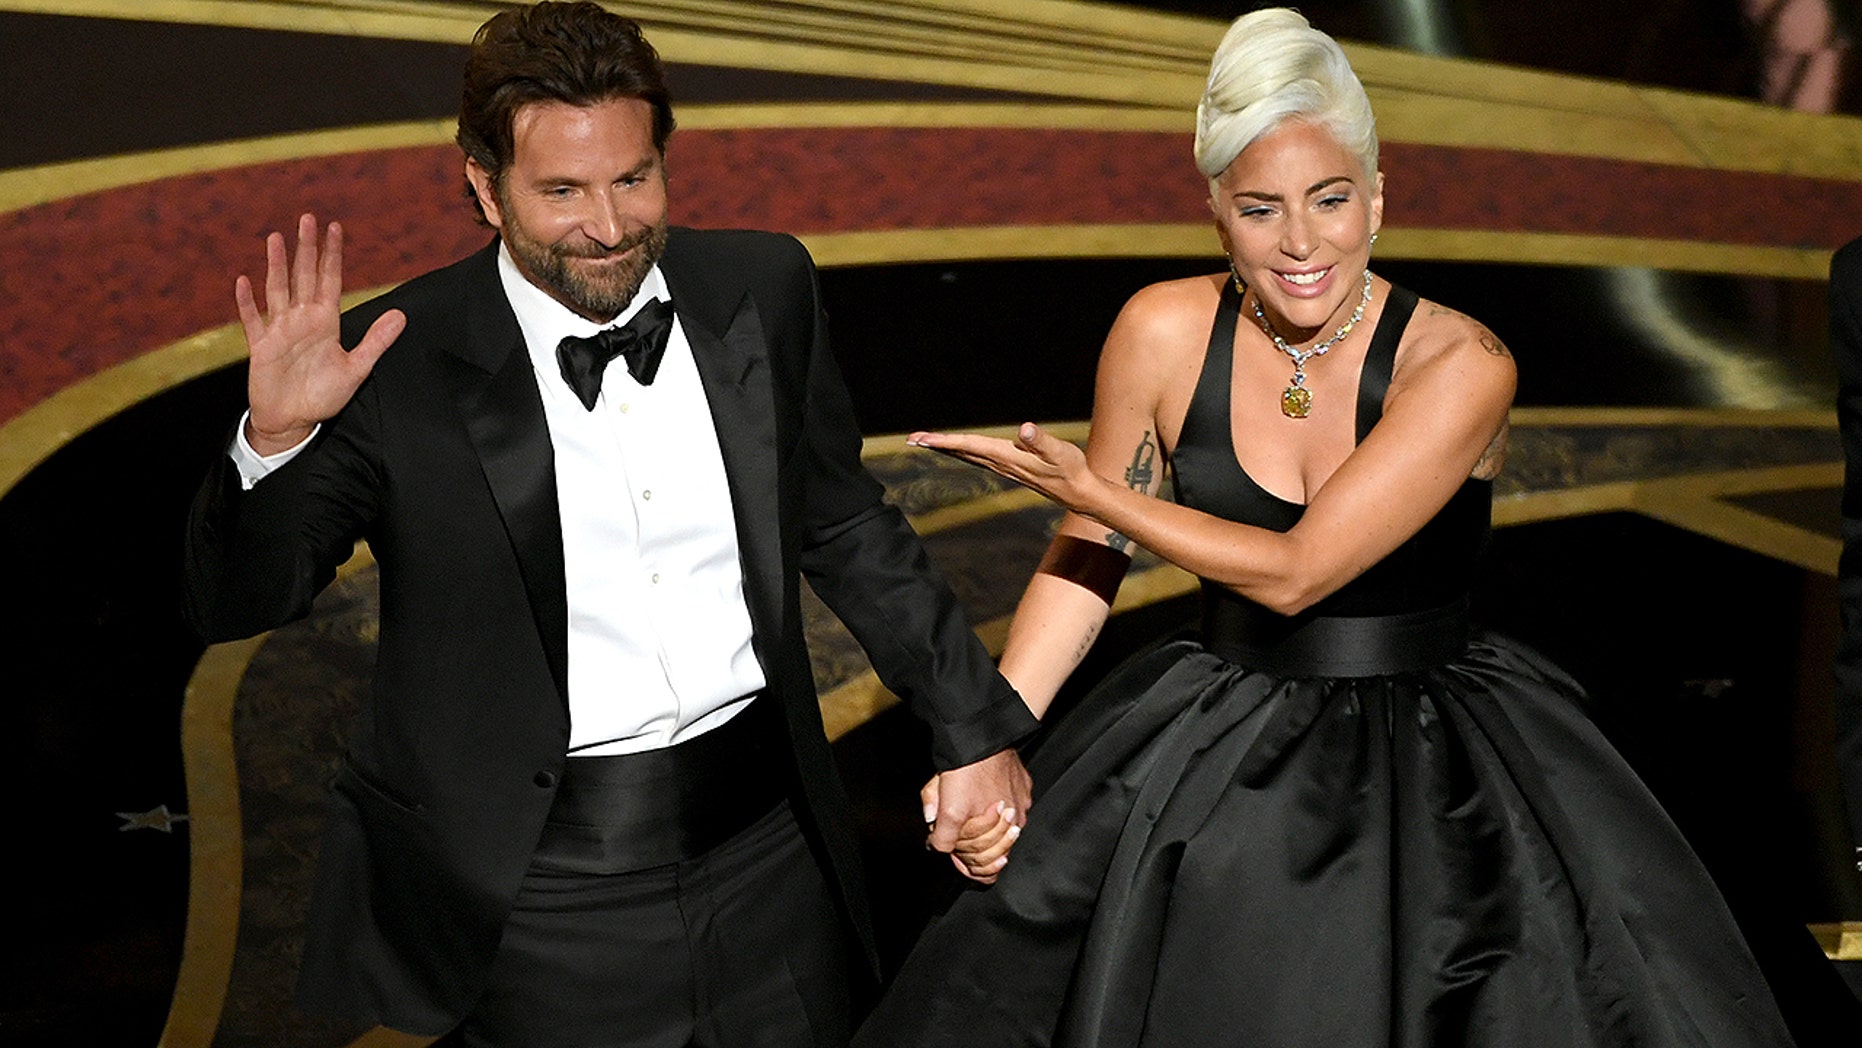 Bradley Cooper and Lady Gaga perform on stage at the 91st Academy Awards at Dolby Theater on February 24, 2019 in Hollywood, California. (Photo by Kevin Winter / Getty Images)